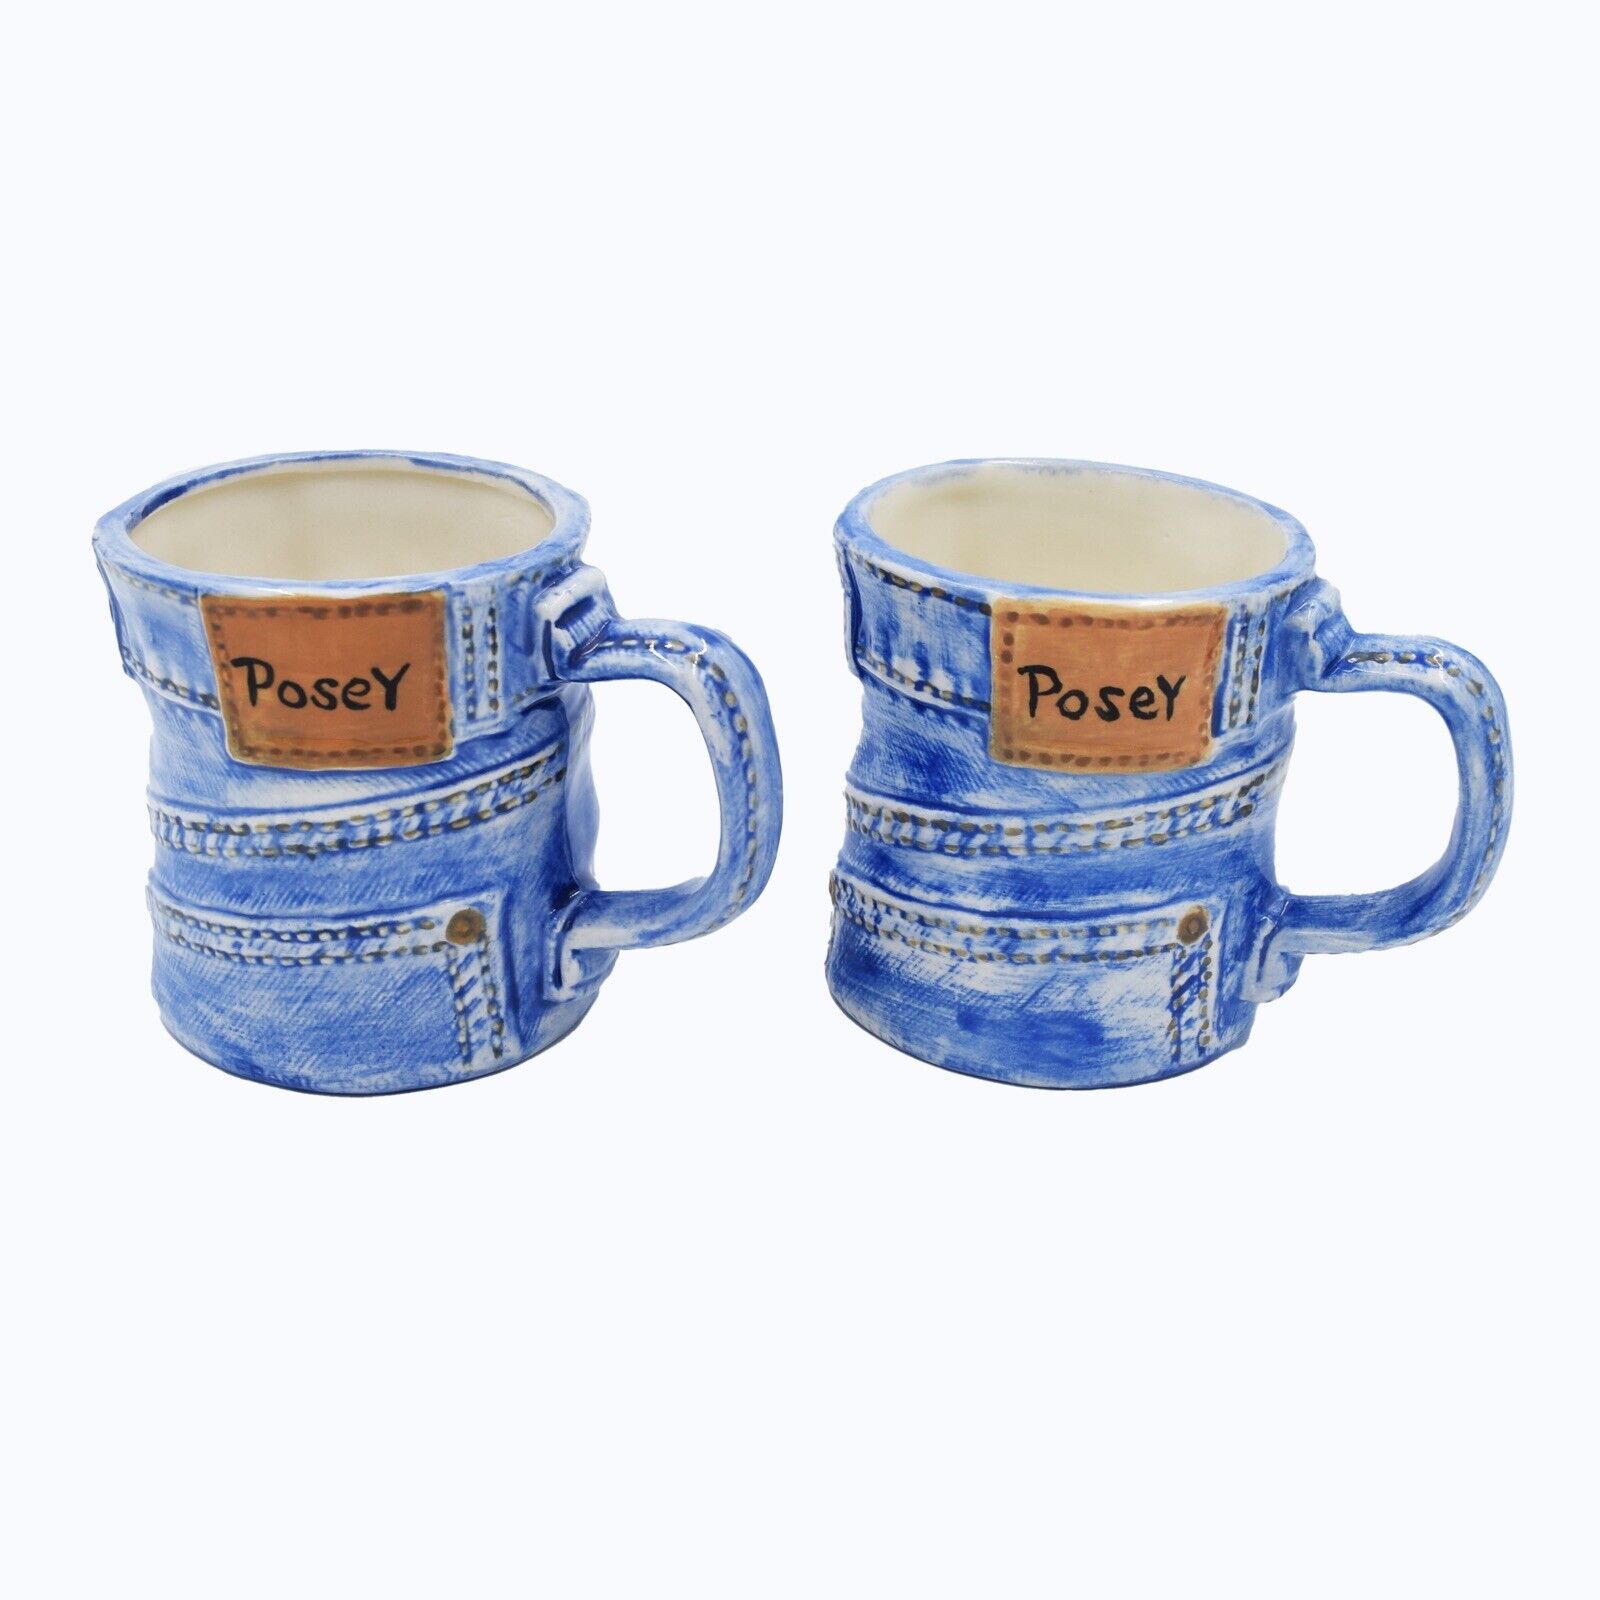 Vintage Ceramic Blue Jean Denim Coffee Mugs Cups Lot of 2 With POSEY NAME